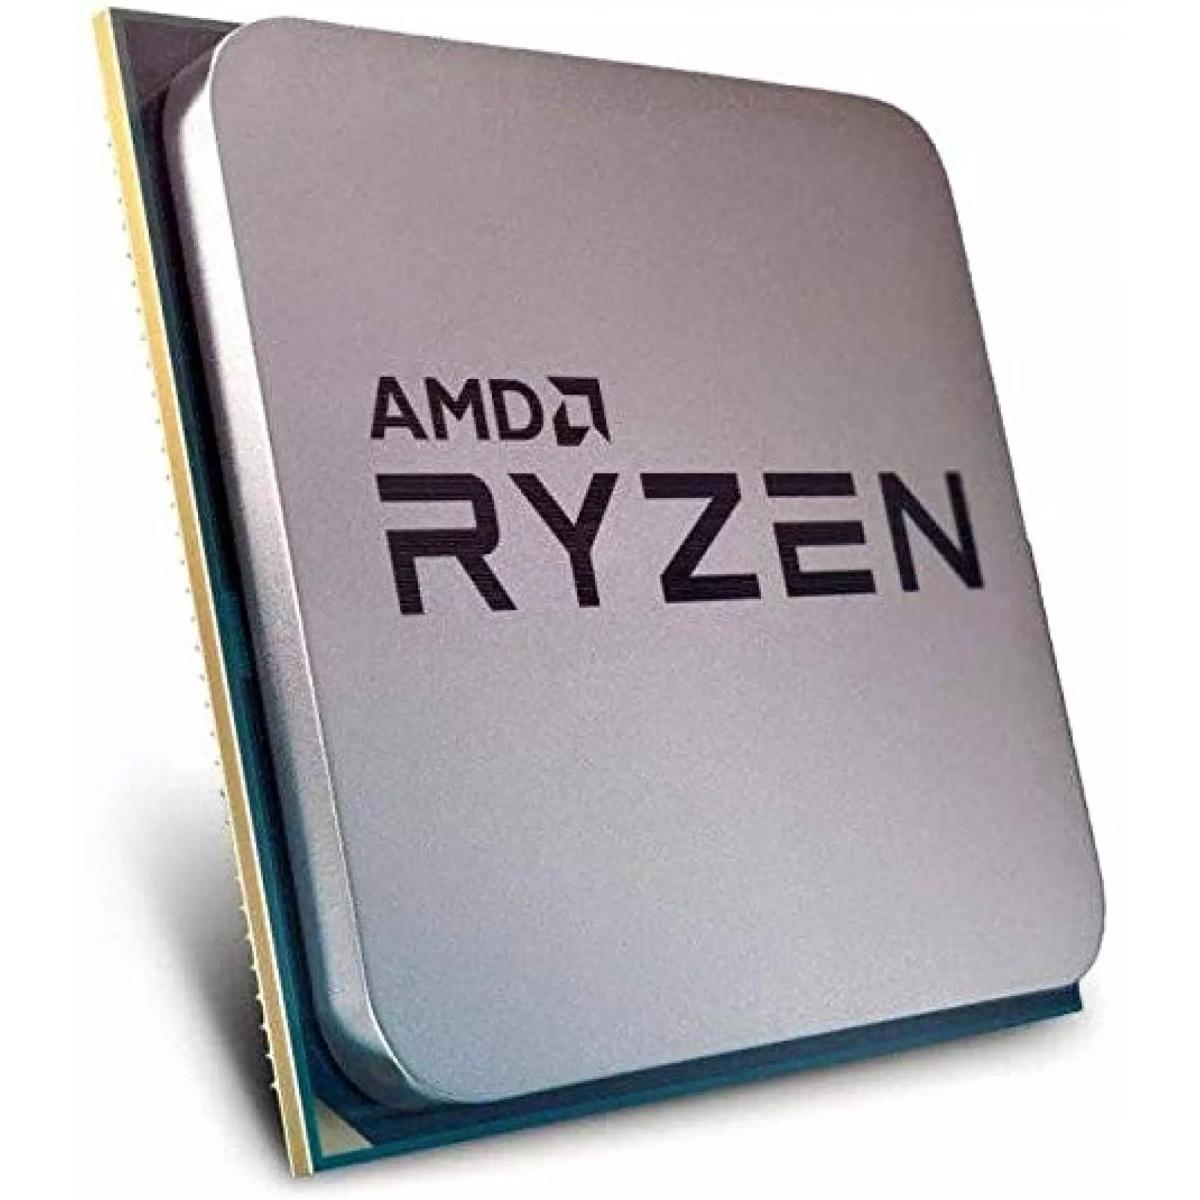 AMD Ryzen 5 5600 Up to 4.4 GHz 6 Core, 12 Threads 32MB Cache AM4 CPU Processor (Tray)